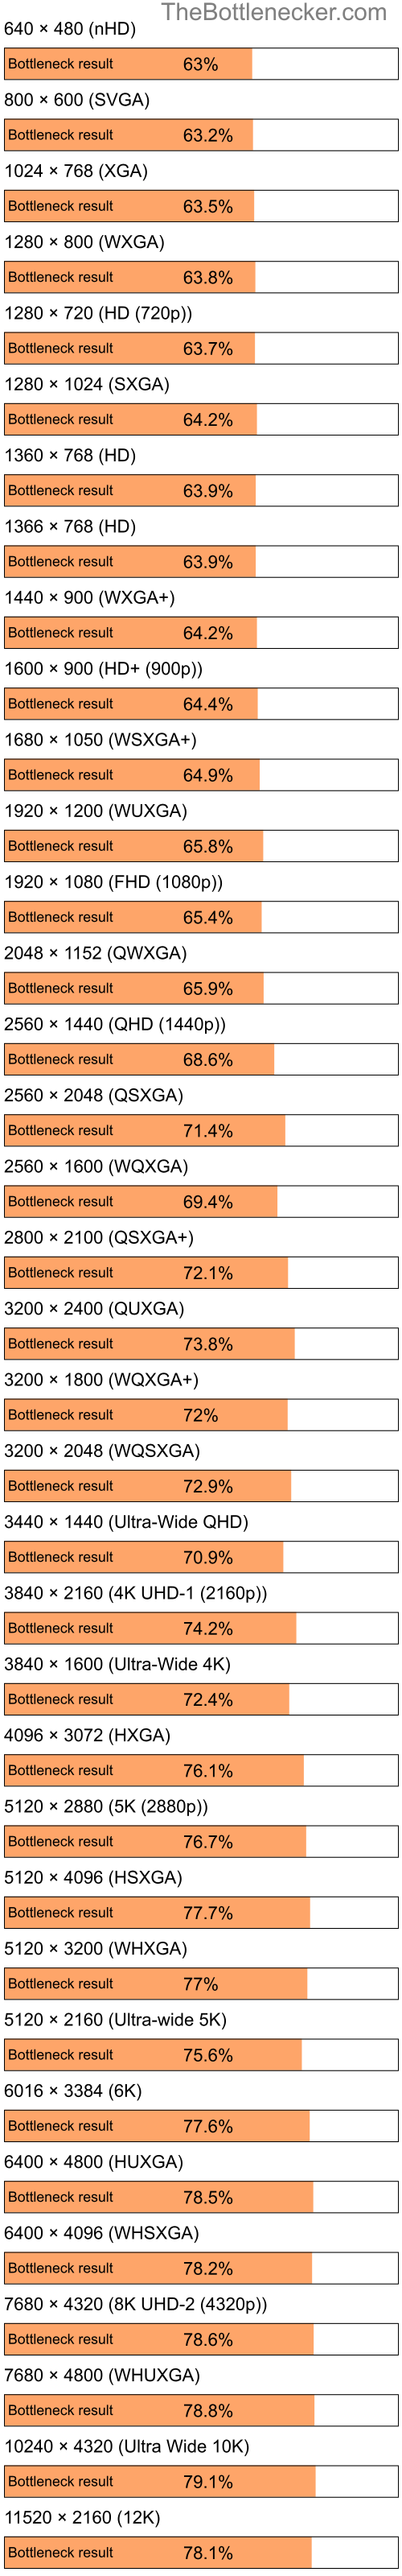 Bottleneck results by resolution for Intel Atom Z520 and AMD Radeon HD 6250 in General Tasks